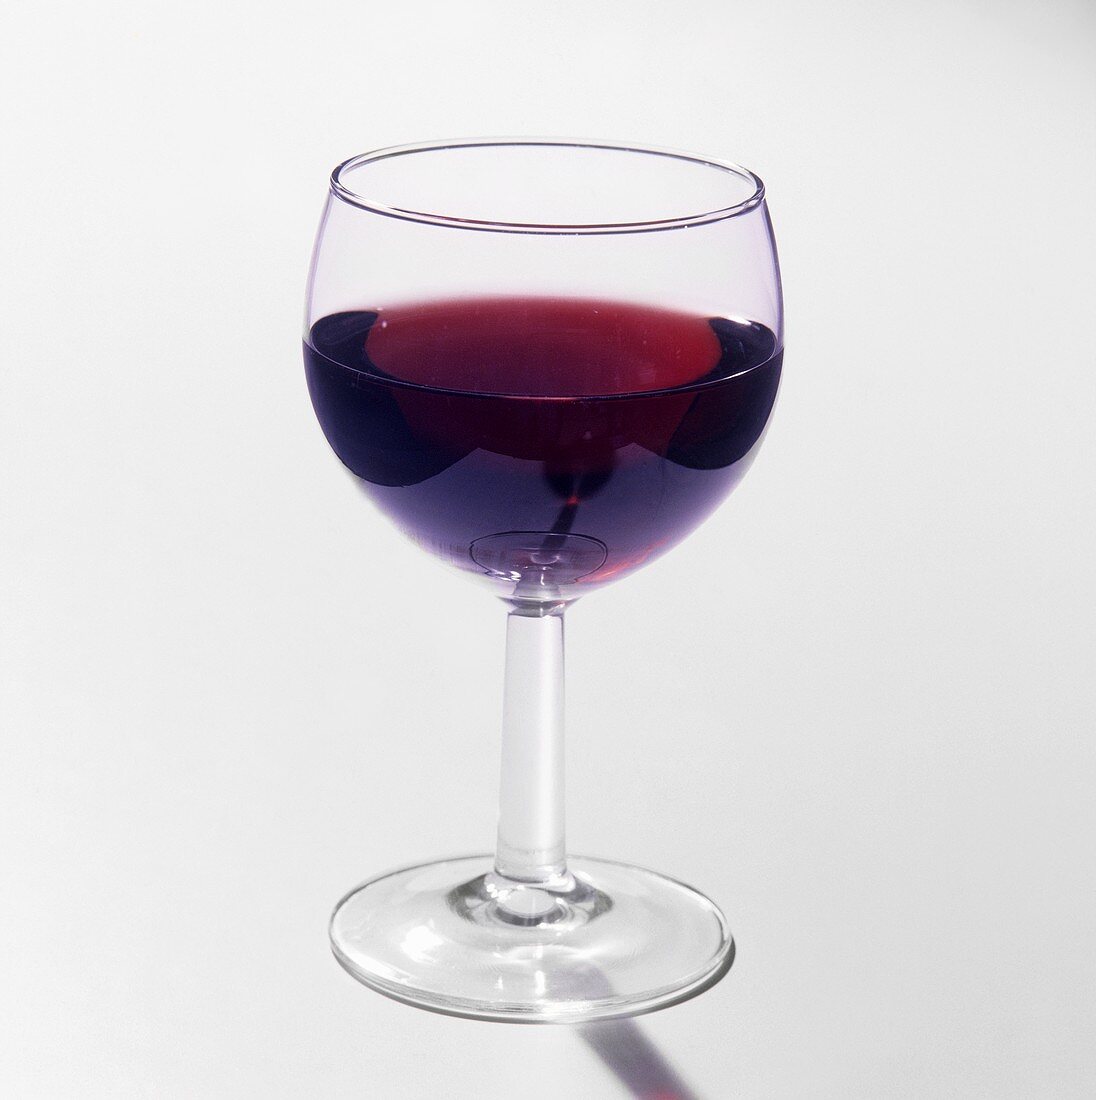 A glass of red wine against a light background